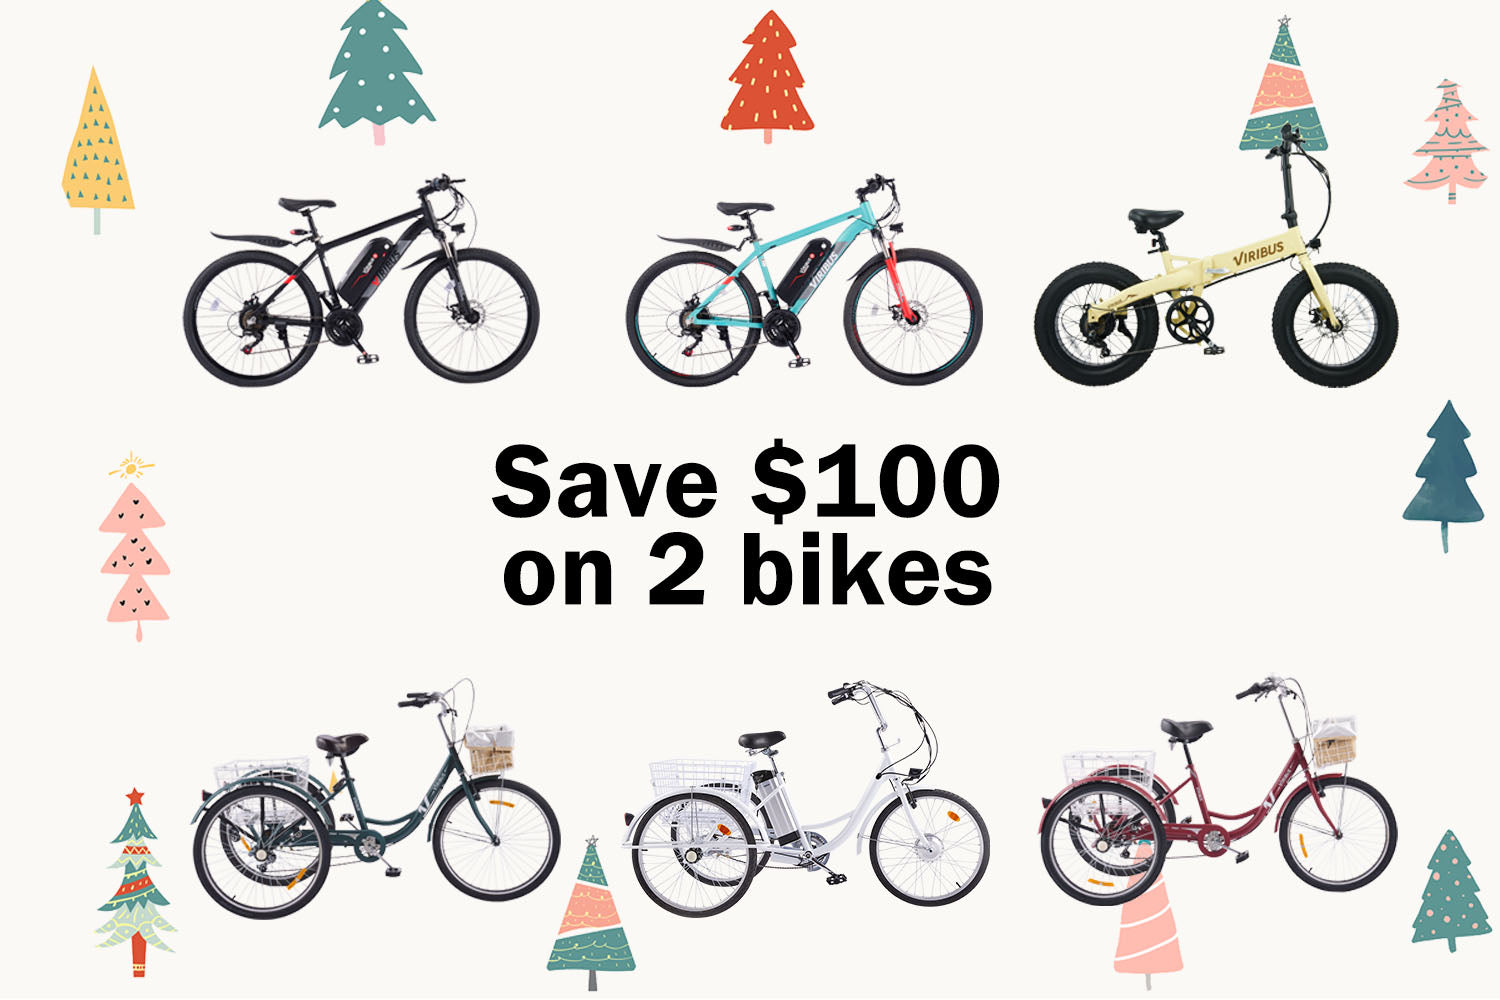 Every Holiday Gift bikes ebike Tricycle for Moms Dads Wives Viribus 